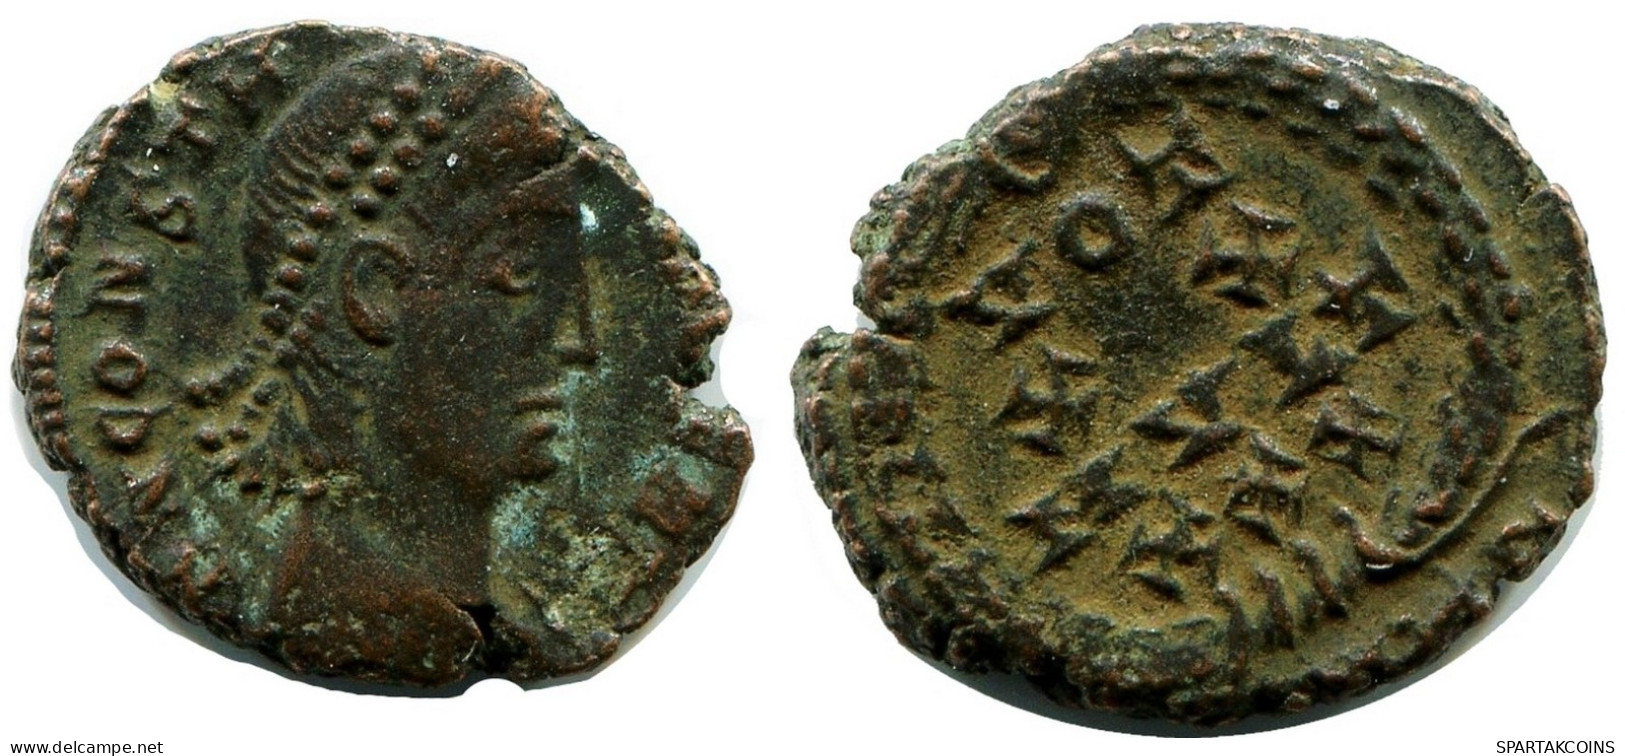 CONSTANS MINTED IN NICOMEDIA FROM THE ROYAL ONTARIO MUSEUM #ANC11745.14.F.A - The Christian Empire (307 AD To 363 AD)